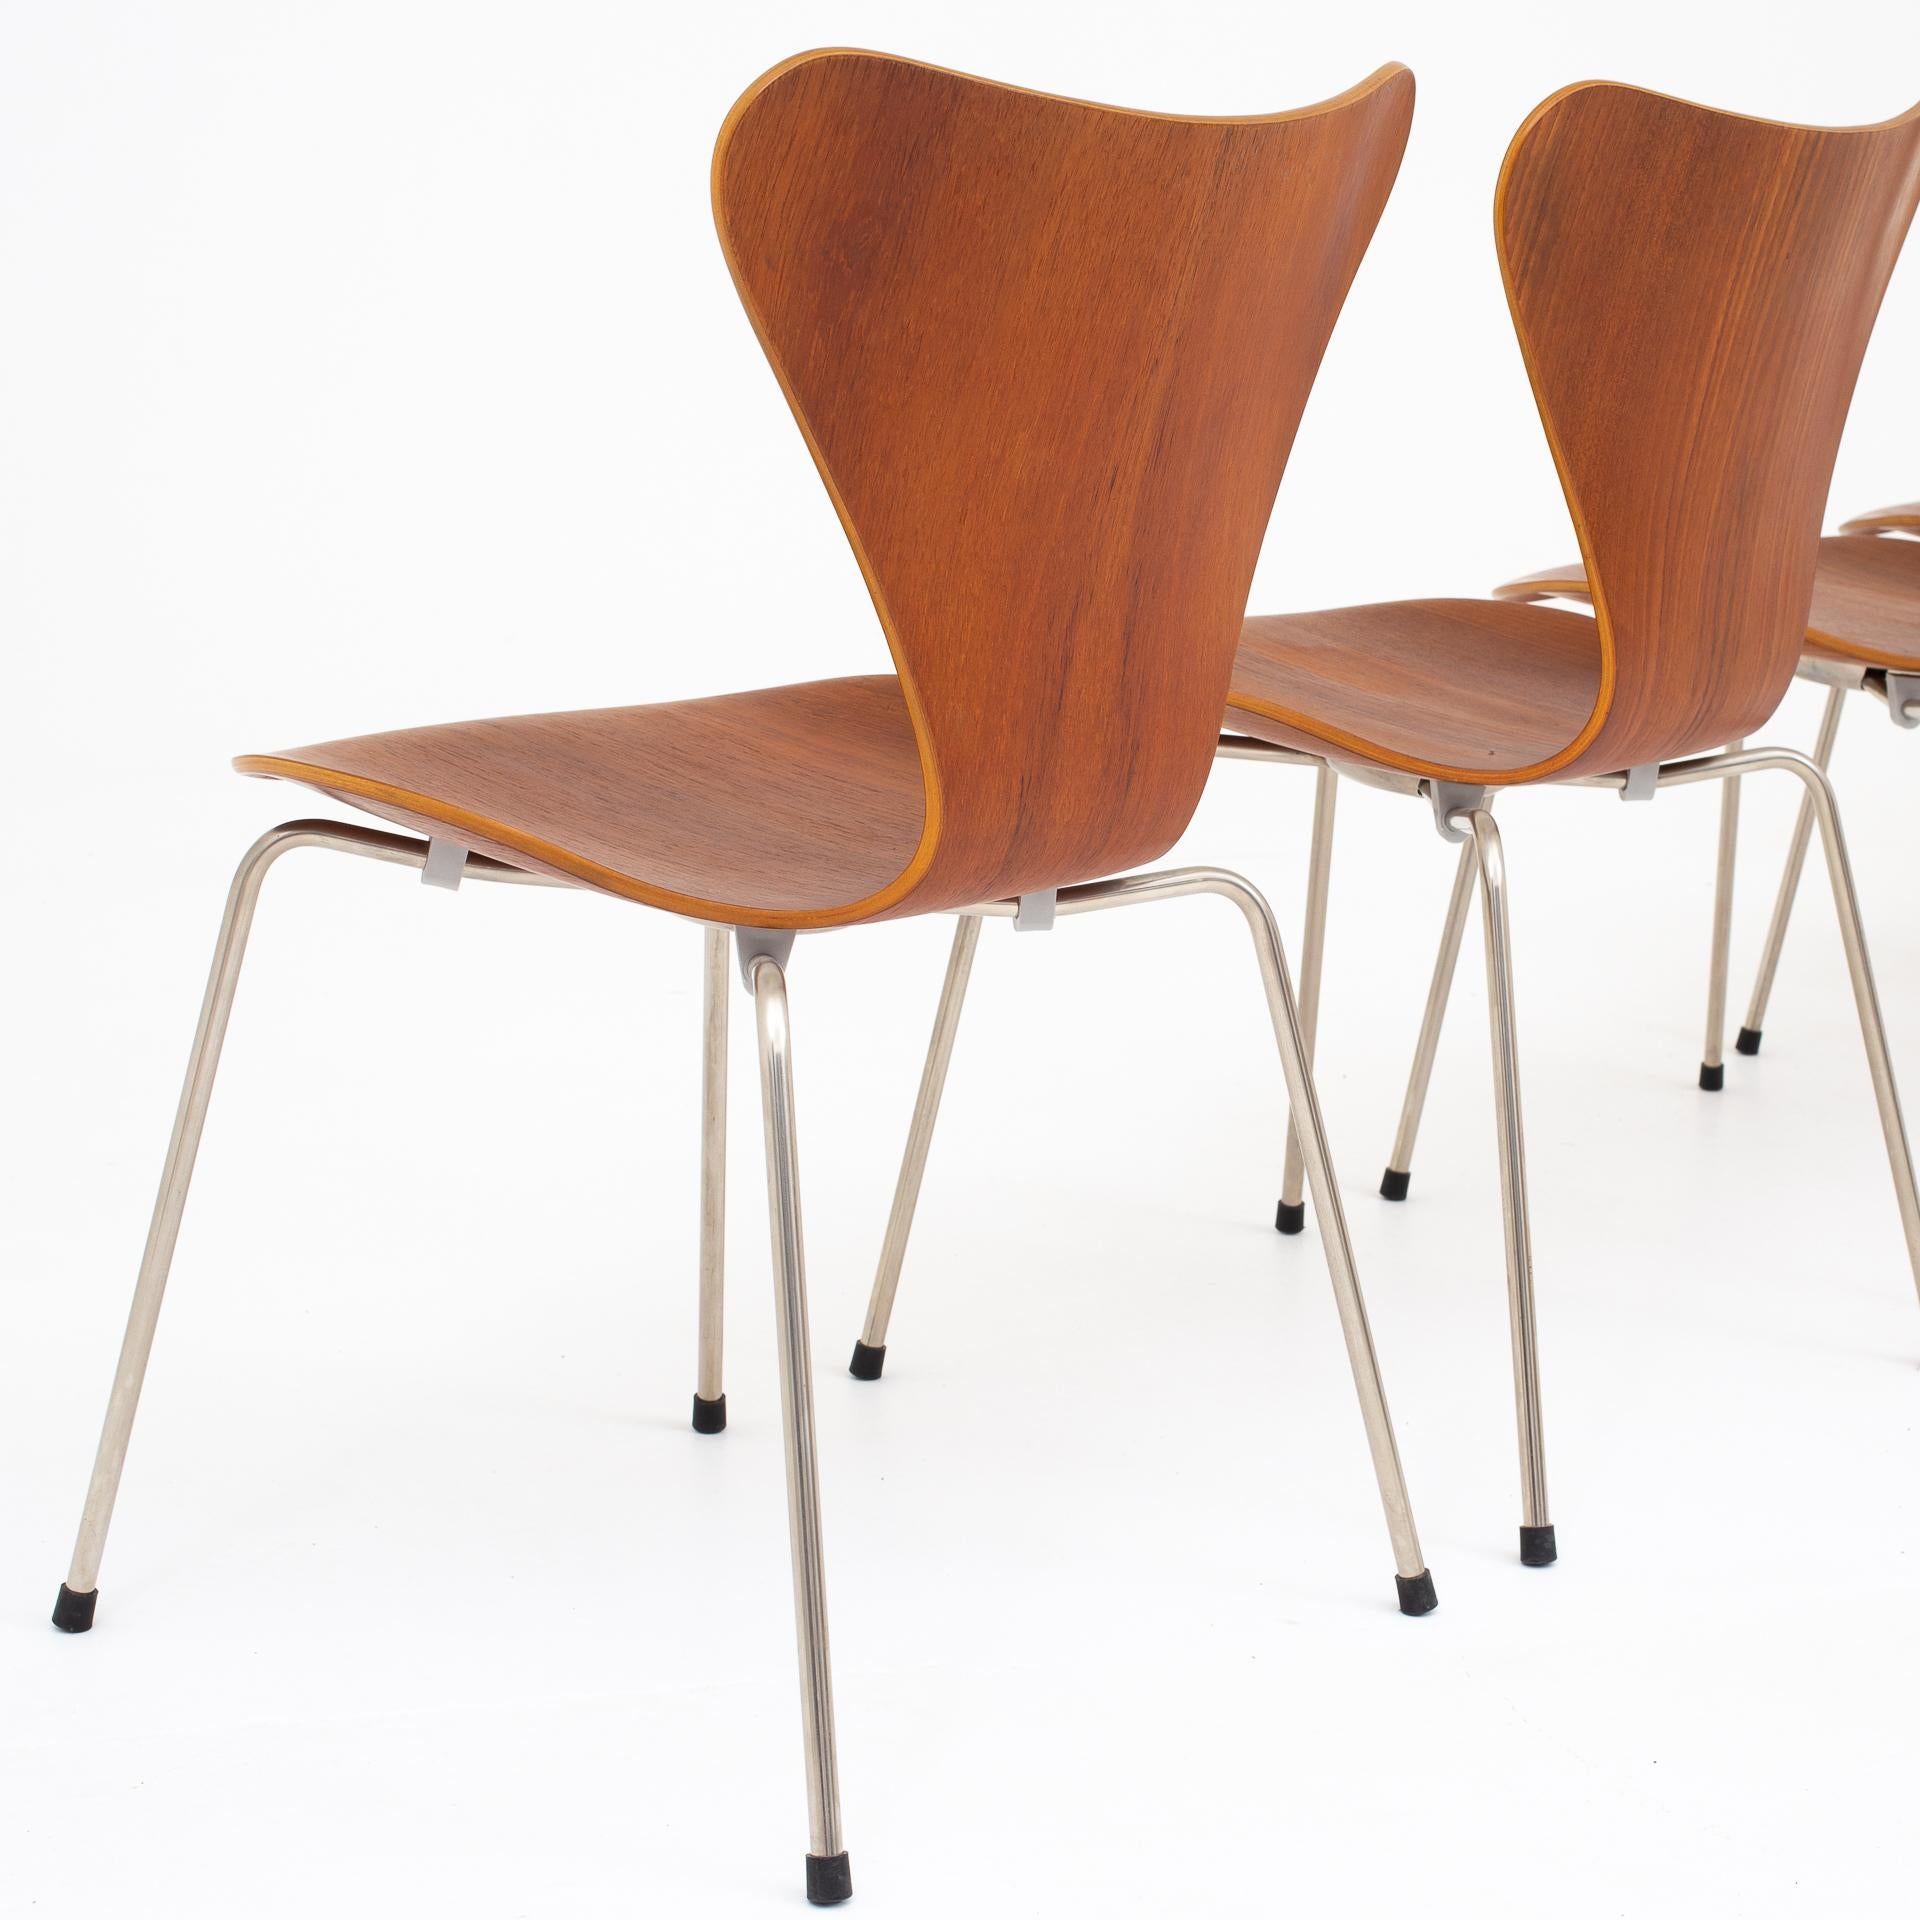 20th Century Set of 6 Dining Chairs by Arne Jacobsen